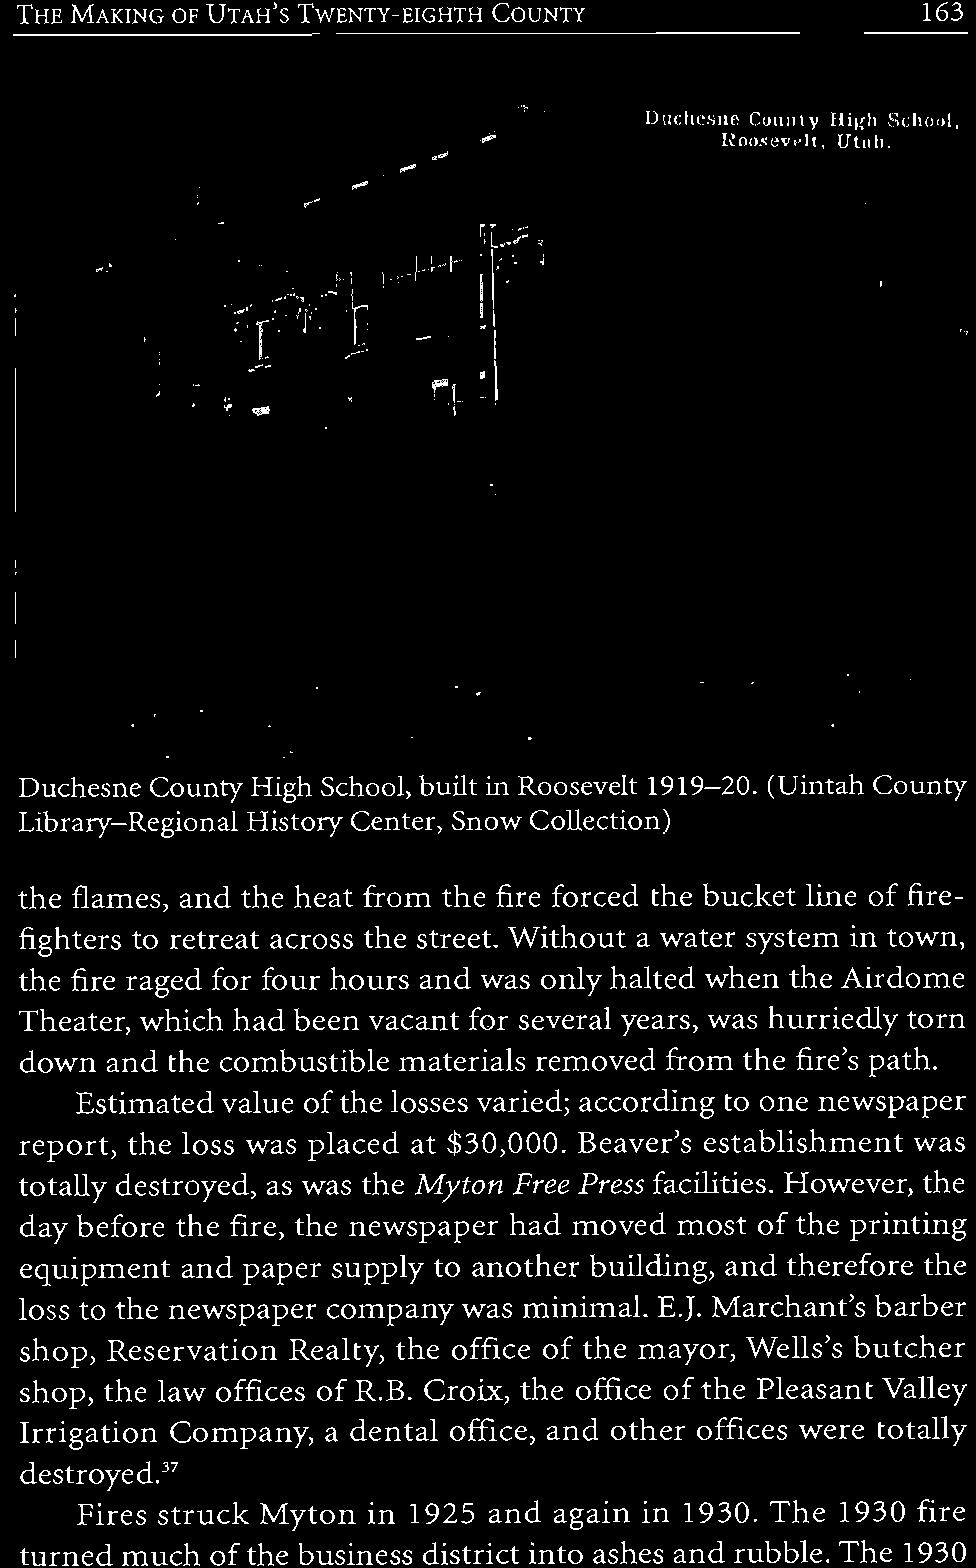 Without a water system in town, the fire raged for four hours and was only halted when the Airdome Theater, which had been vacant for several years, was hurriedly torn down and the combustible